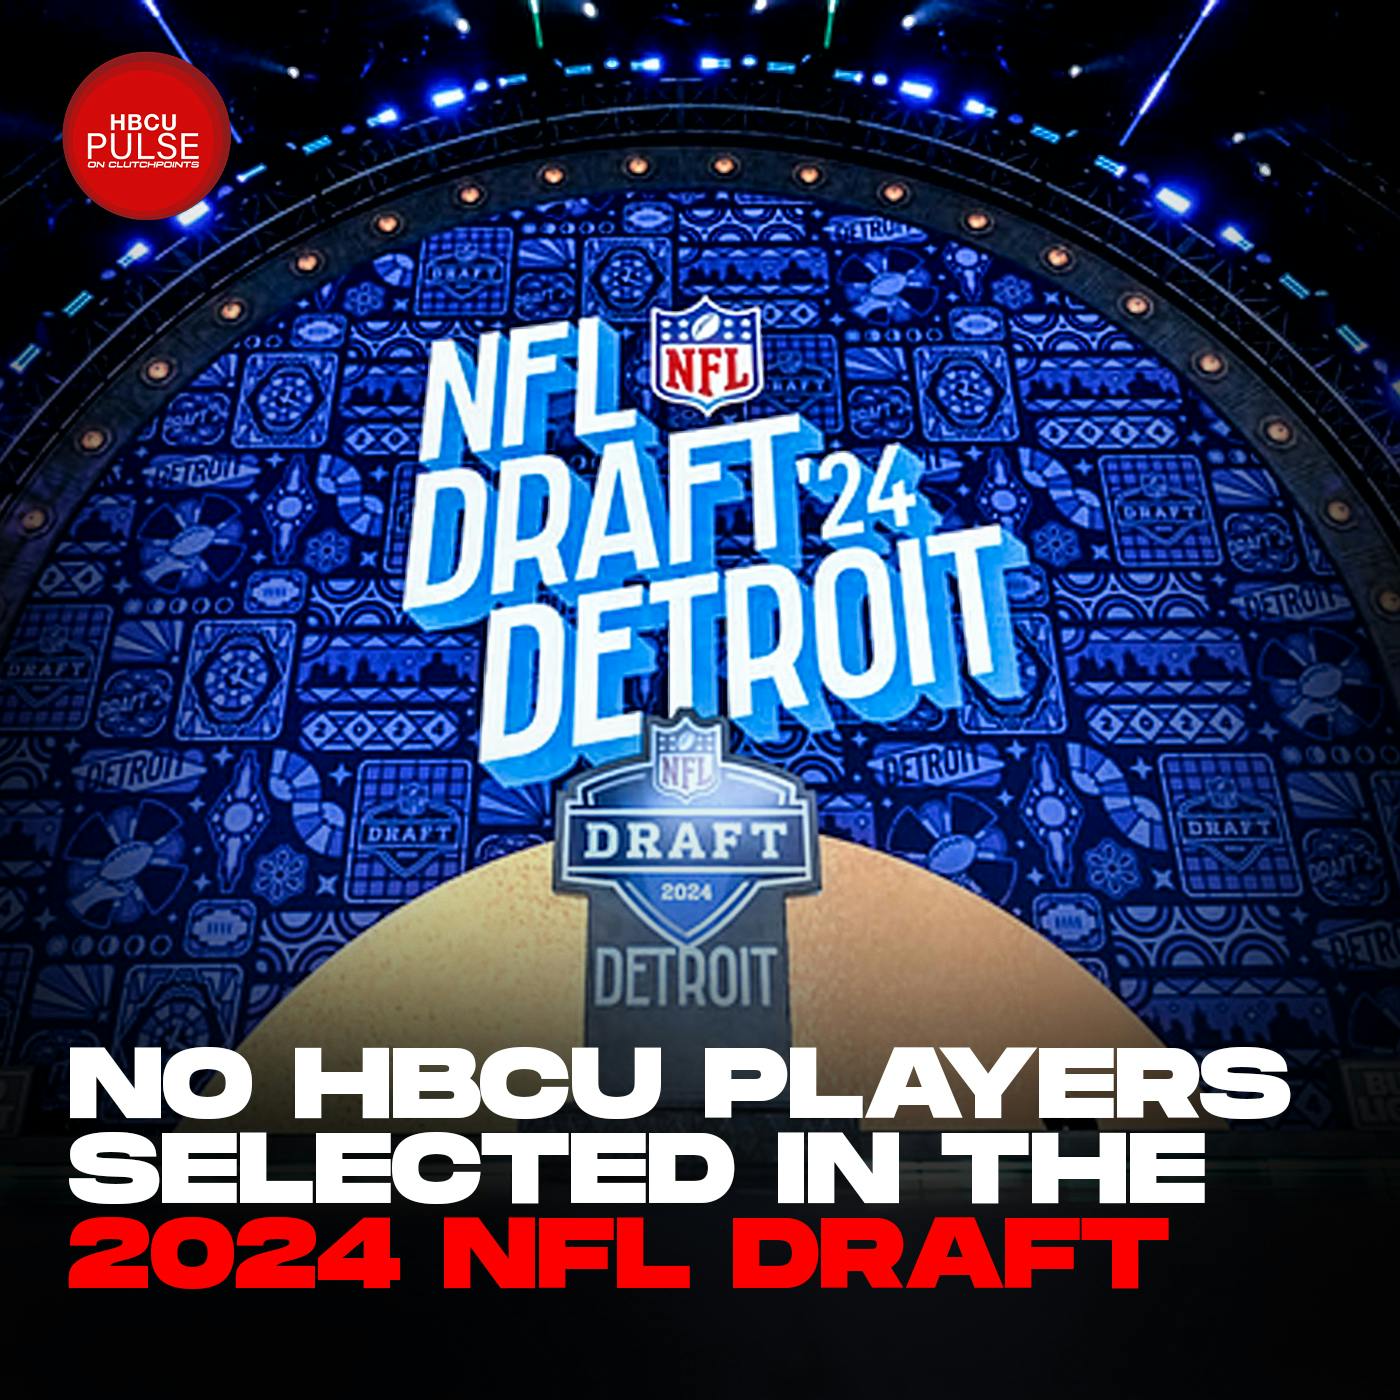 No HBCU Players Drafted To The NFL, UDFA Reaction